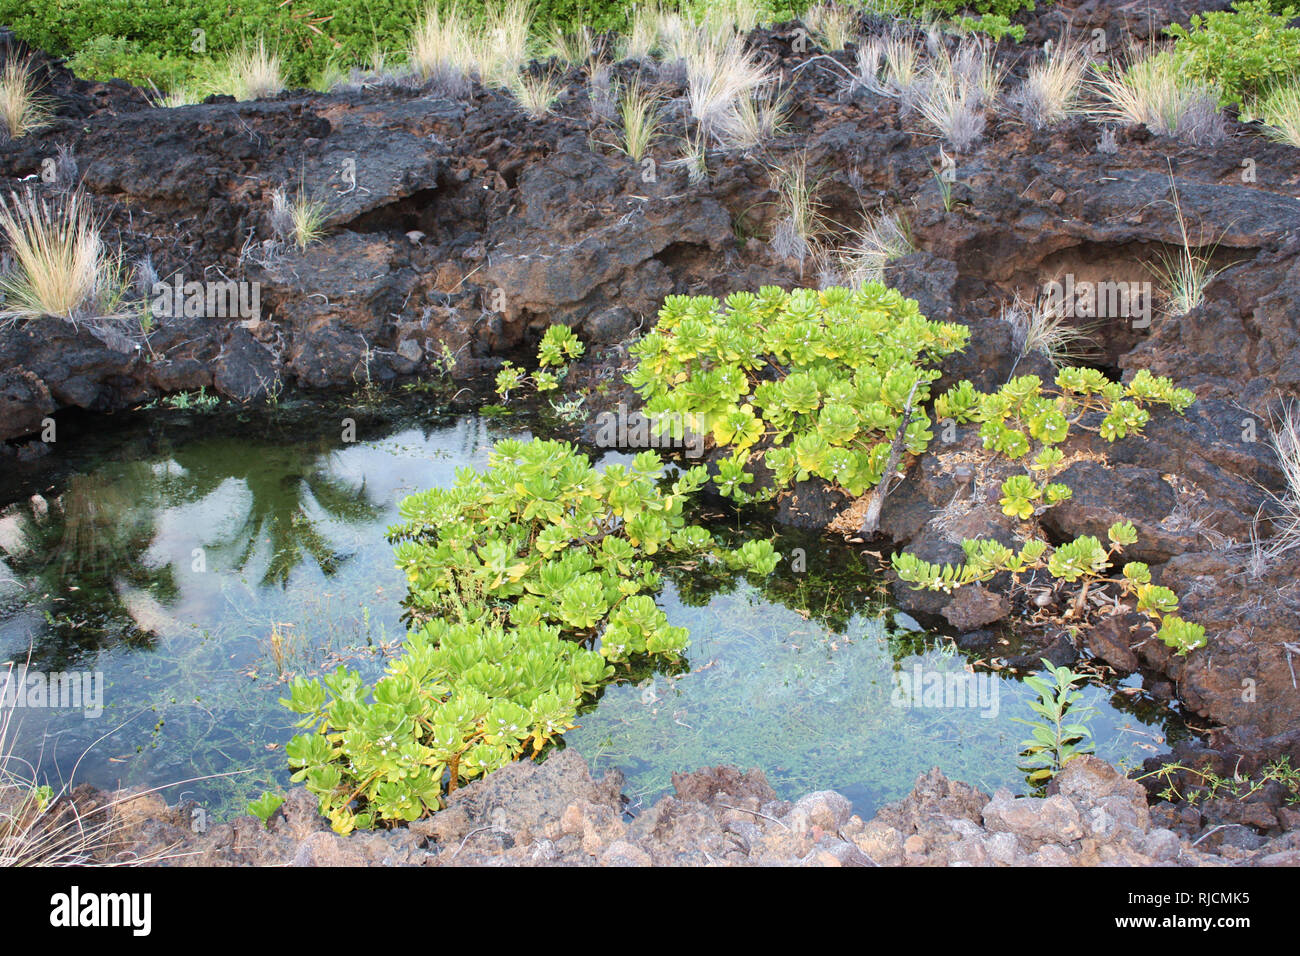 Tropical water plants, Water hyssop, and grasses growing in and on a pond formed from volcanic rock, in Hawaii, USA Stock Photo